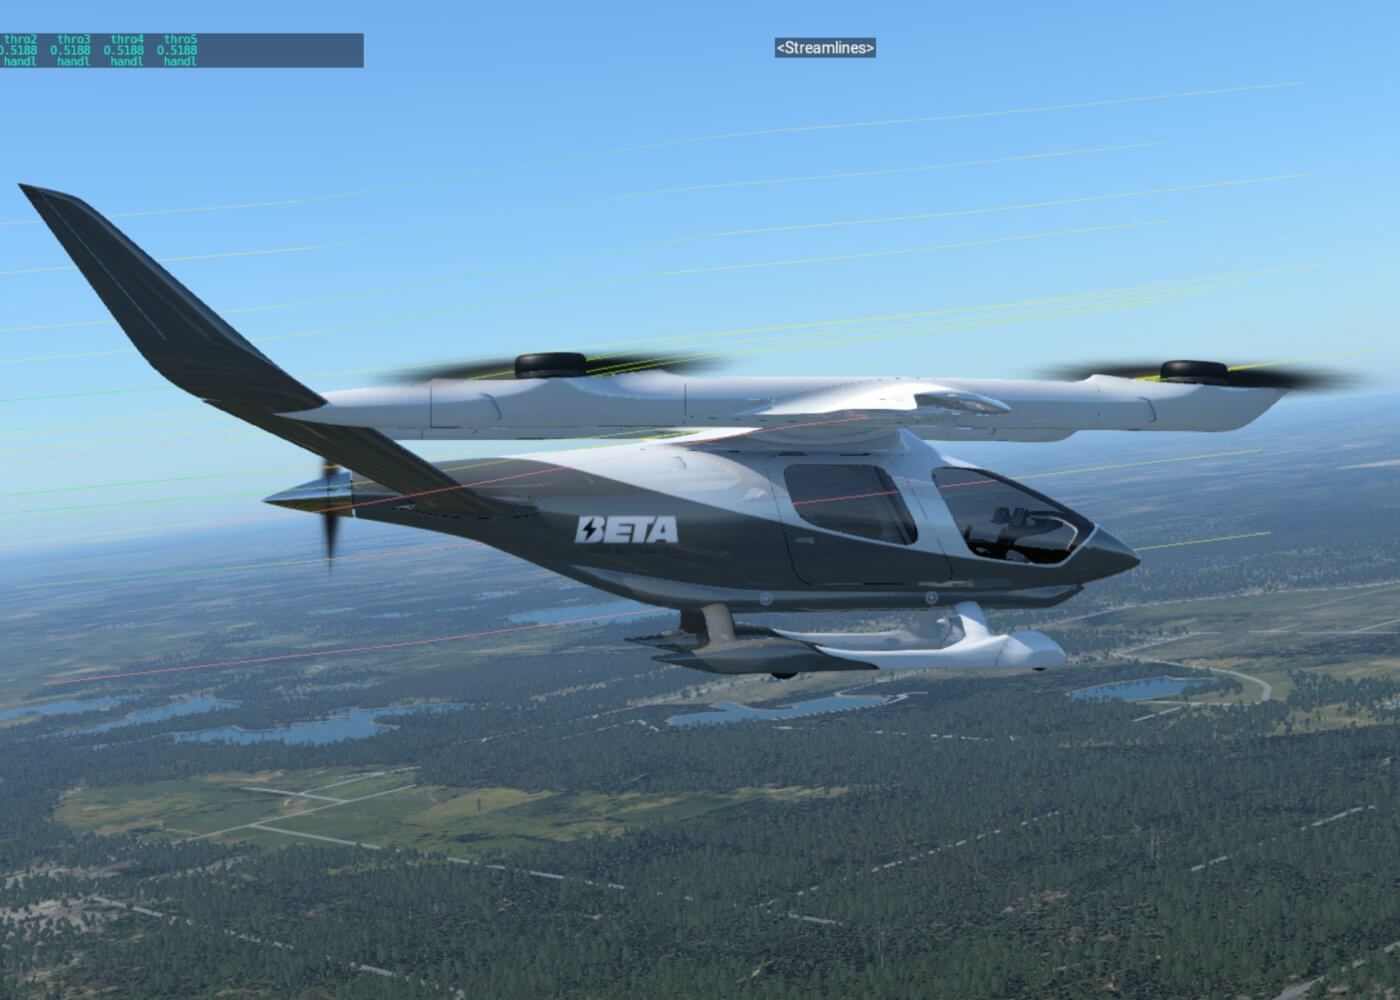 Can't chose a Helicopter! - Aircraft - Microsoft Flight Simulator